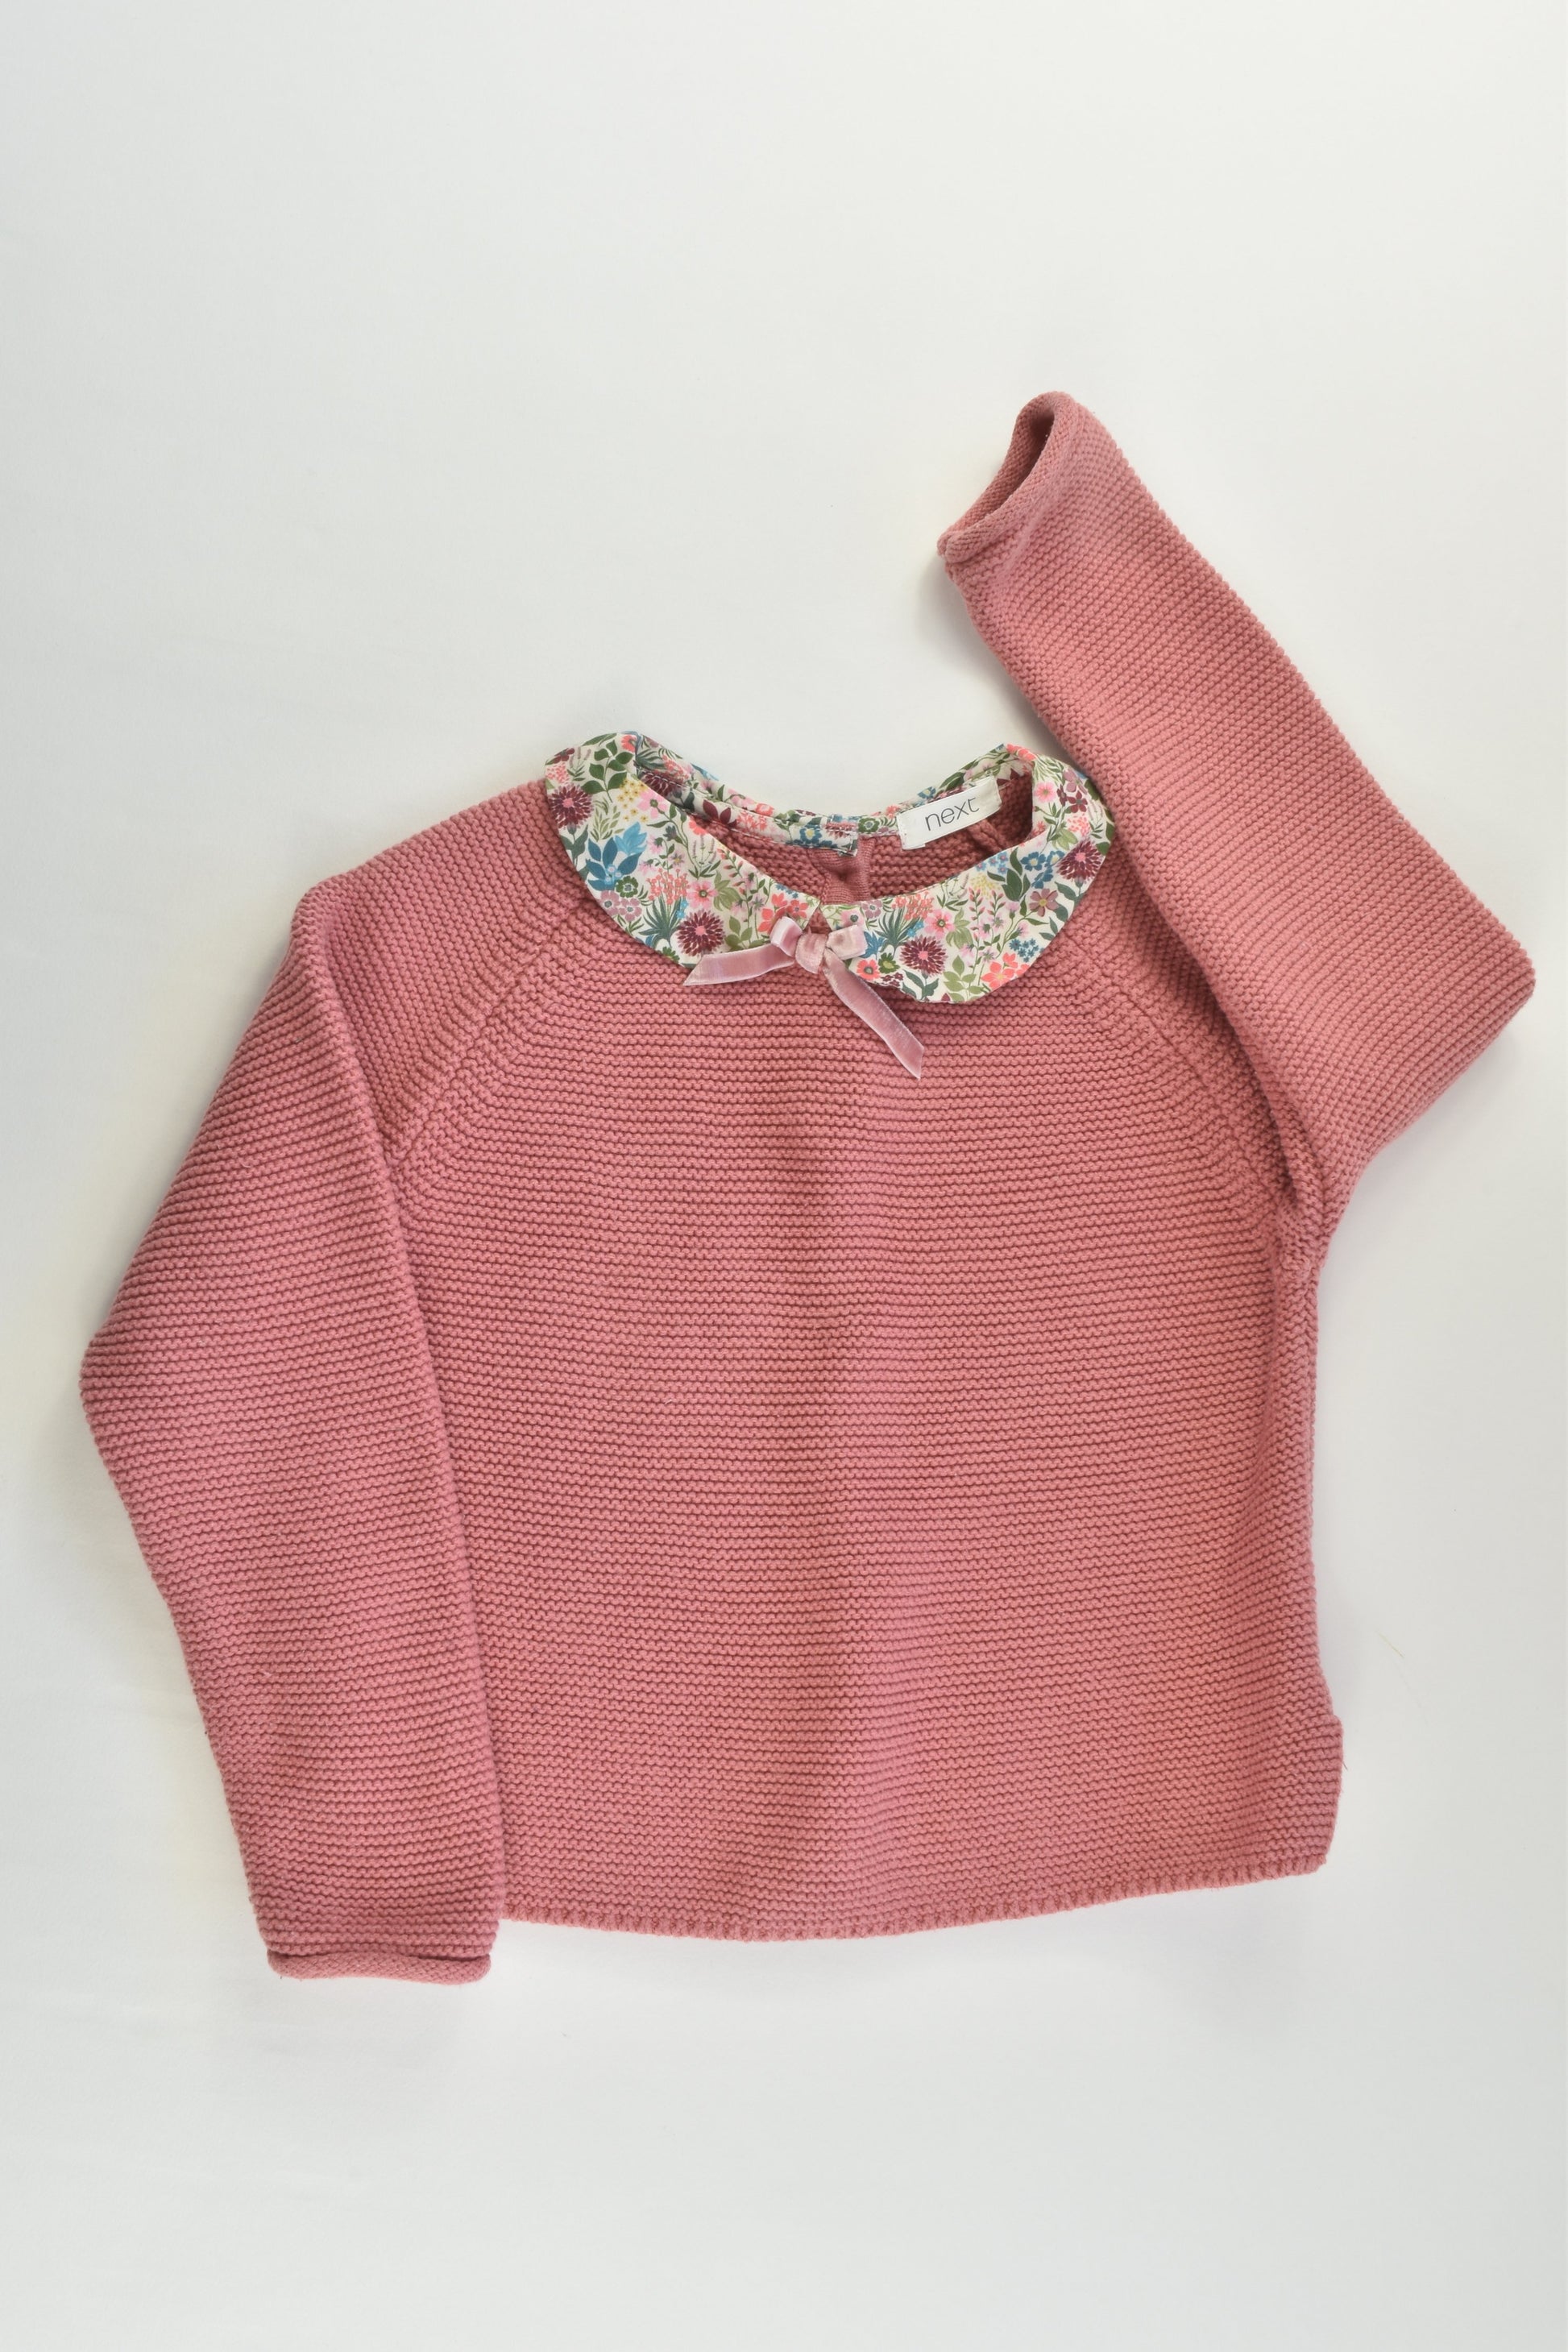 Next Size 2-3 (98 cm) Knitted Jumper with Floral Collar